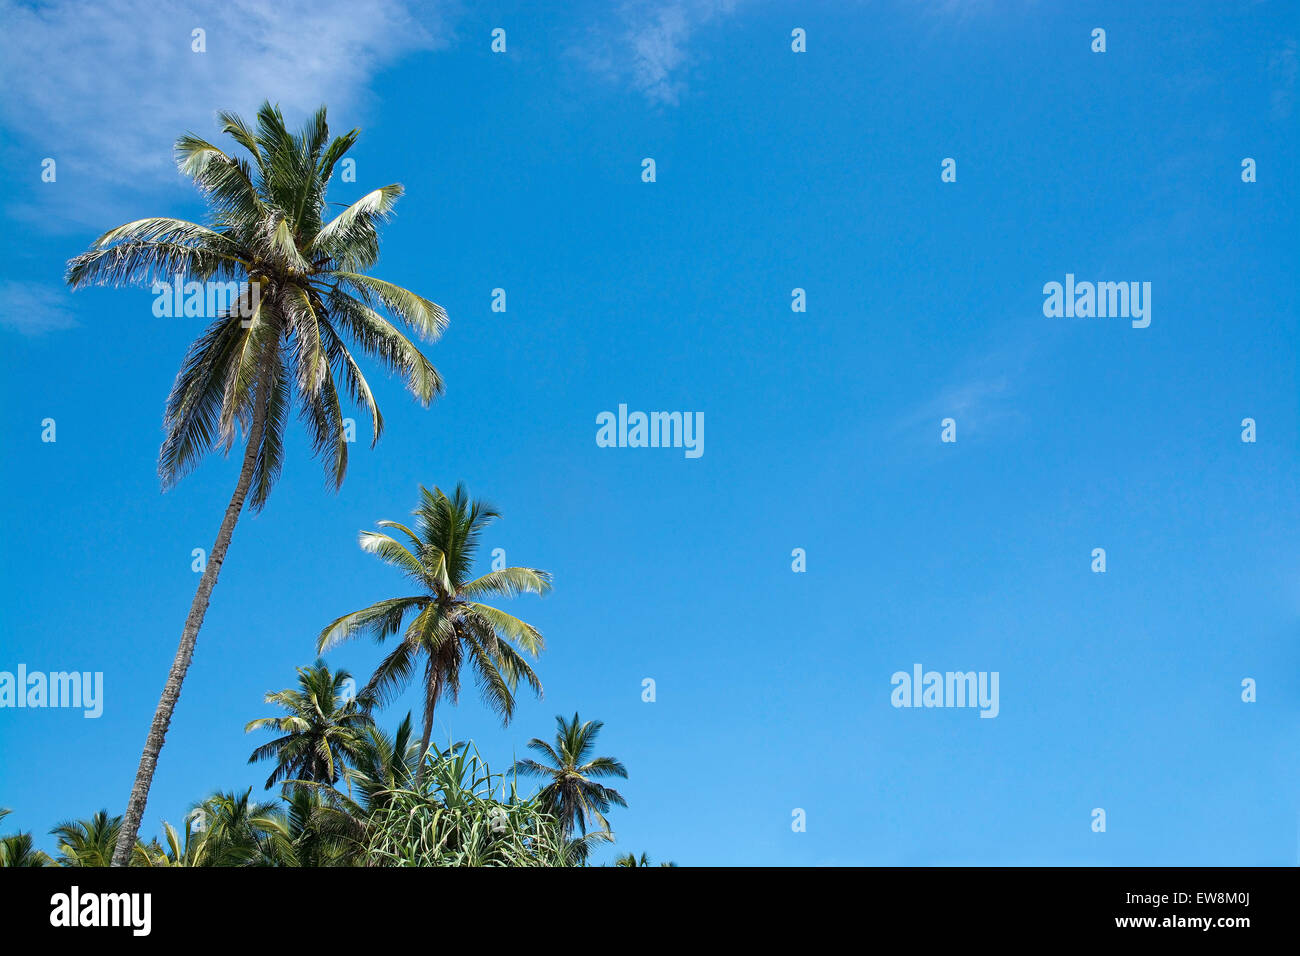 Coconut palm trees and sky in remote location, Southern Province, Sri Lanka, Asia. Stock Photo